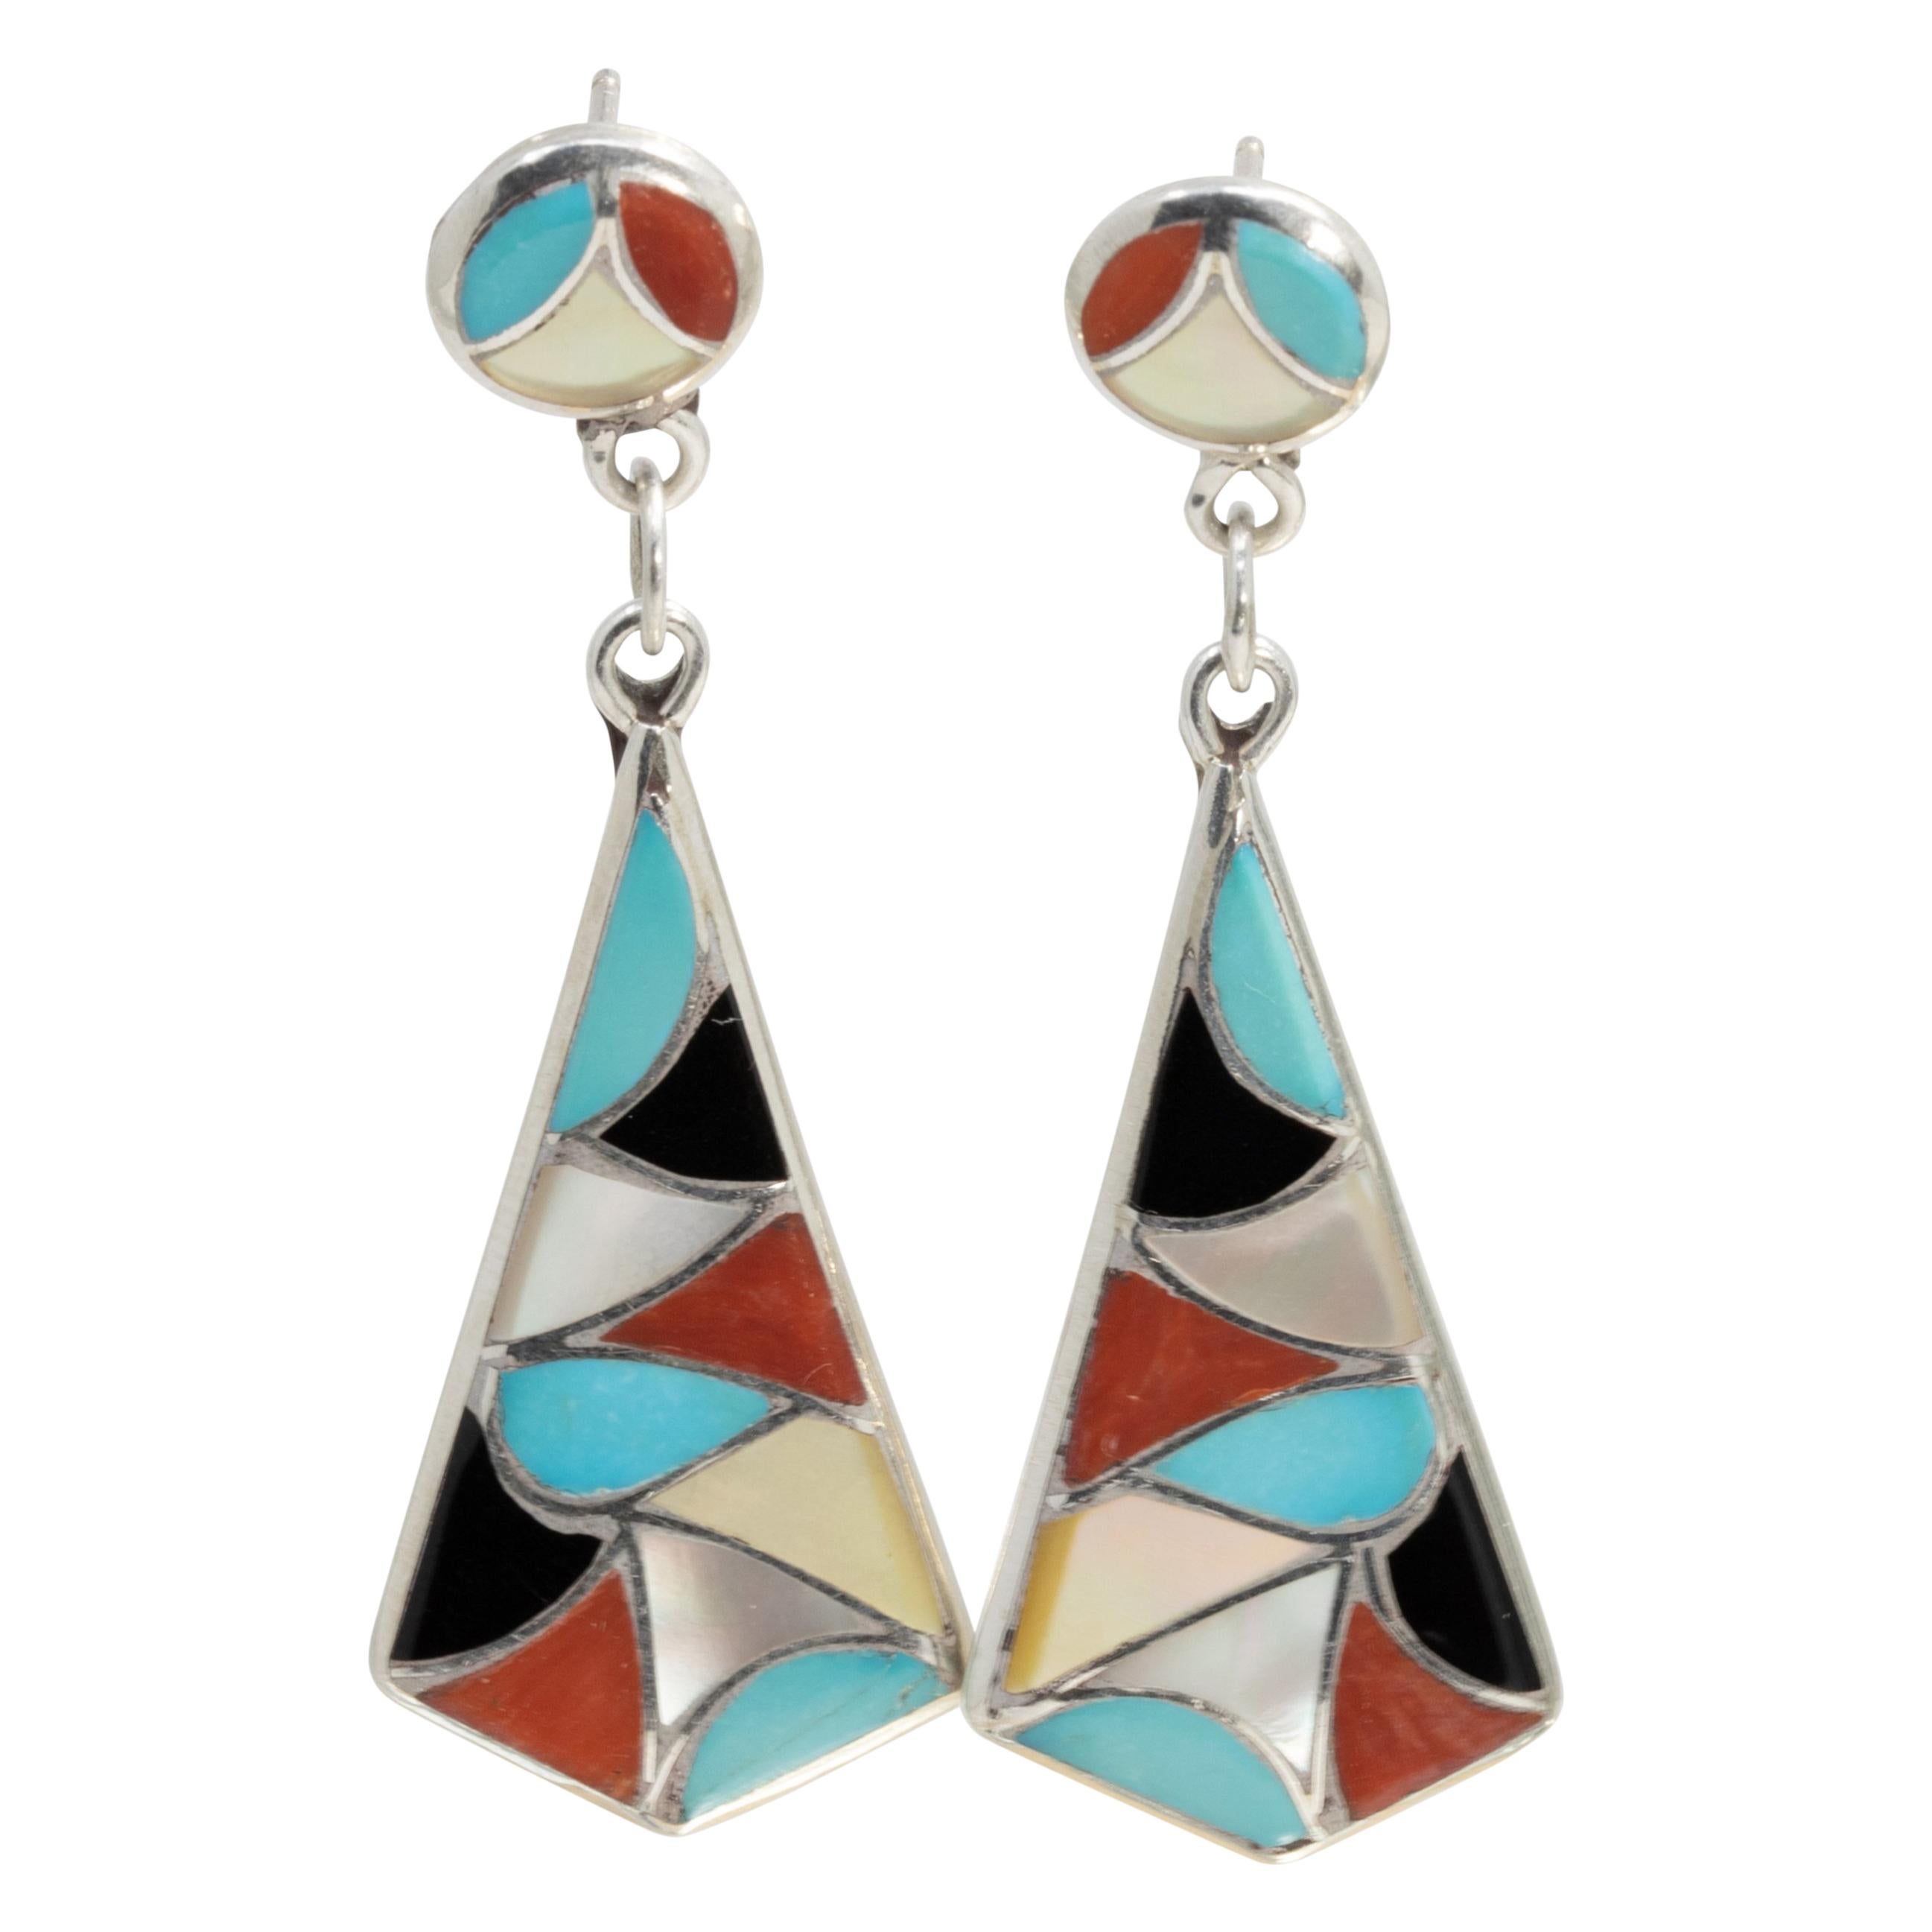 Zuni Native American Mosaic Dangle Earrings, Coral, Turquoise, Sterling Silver